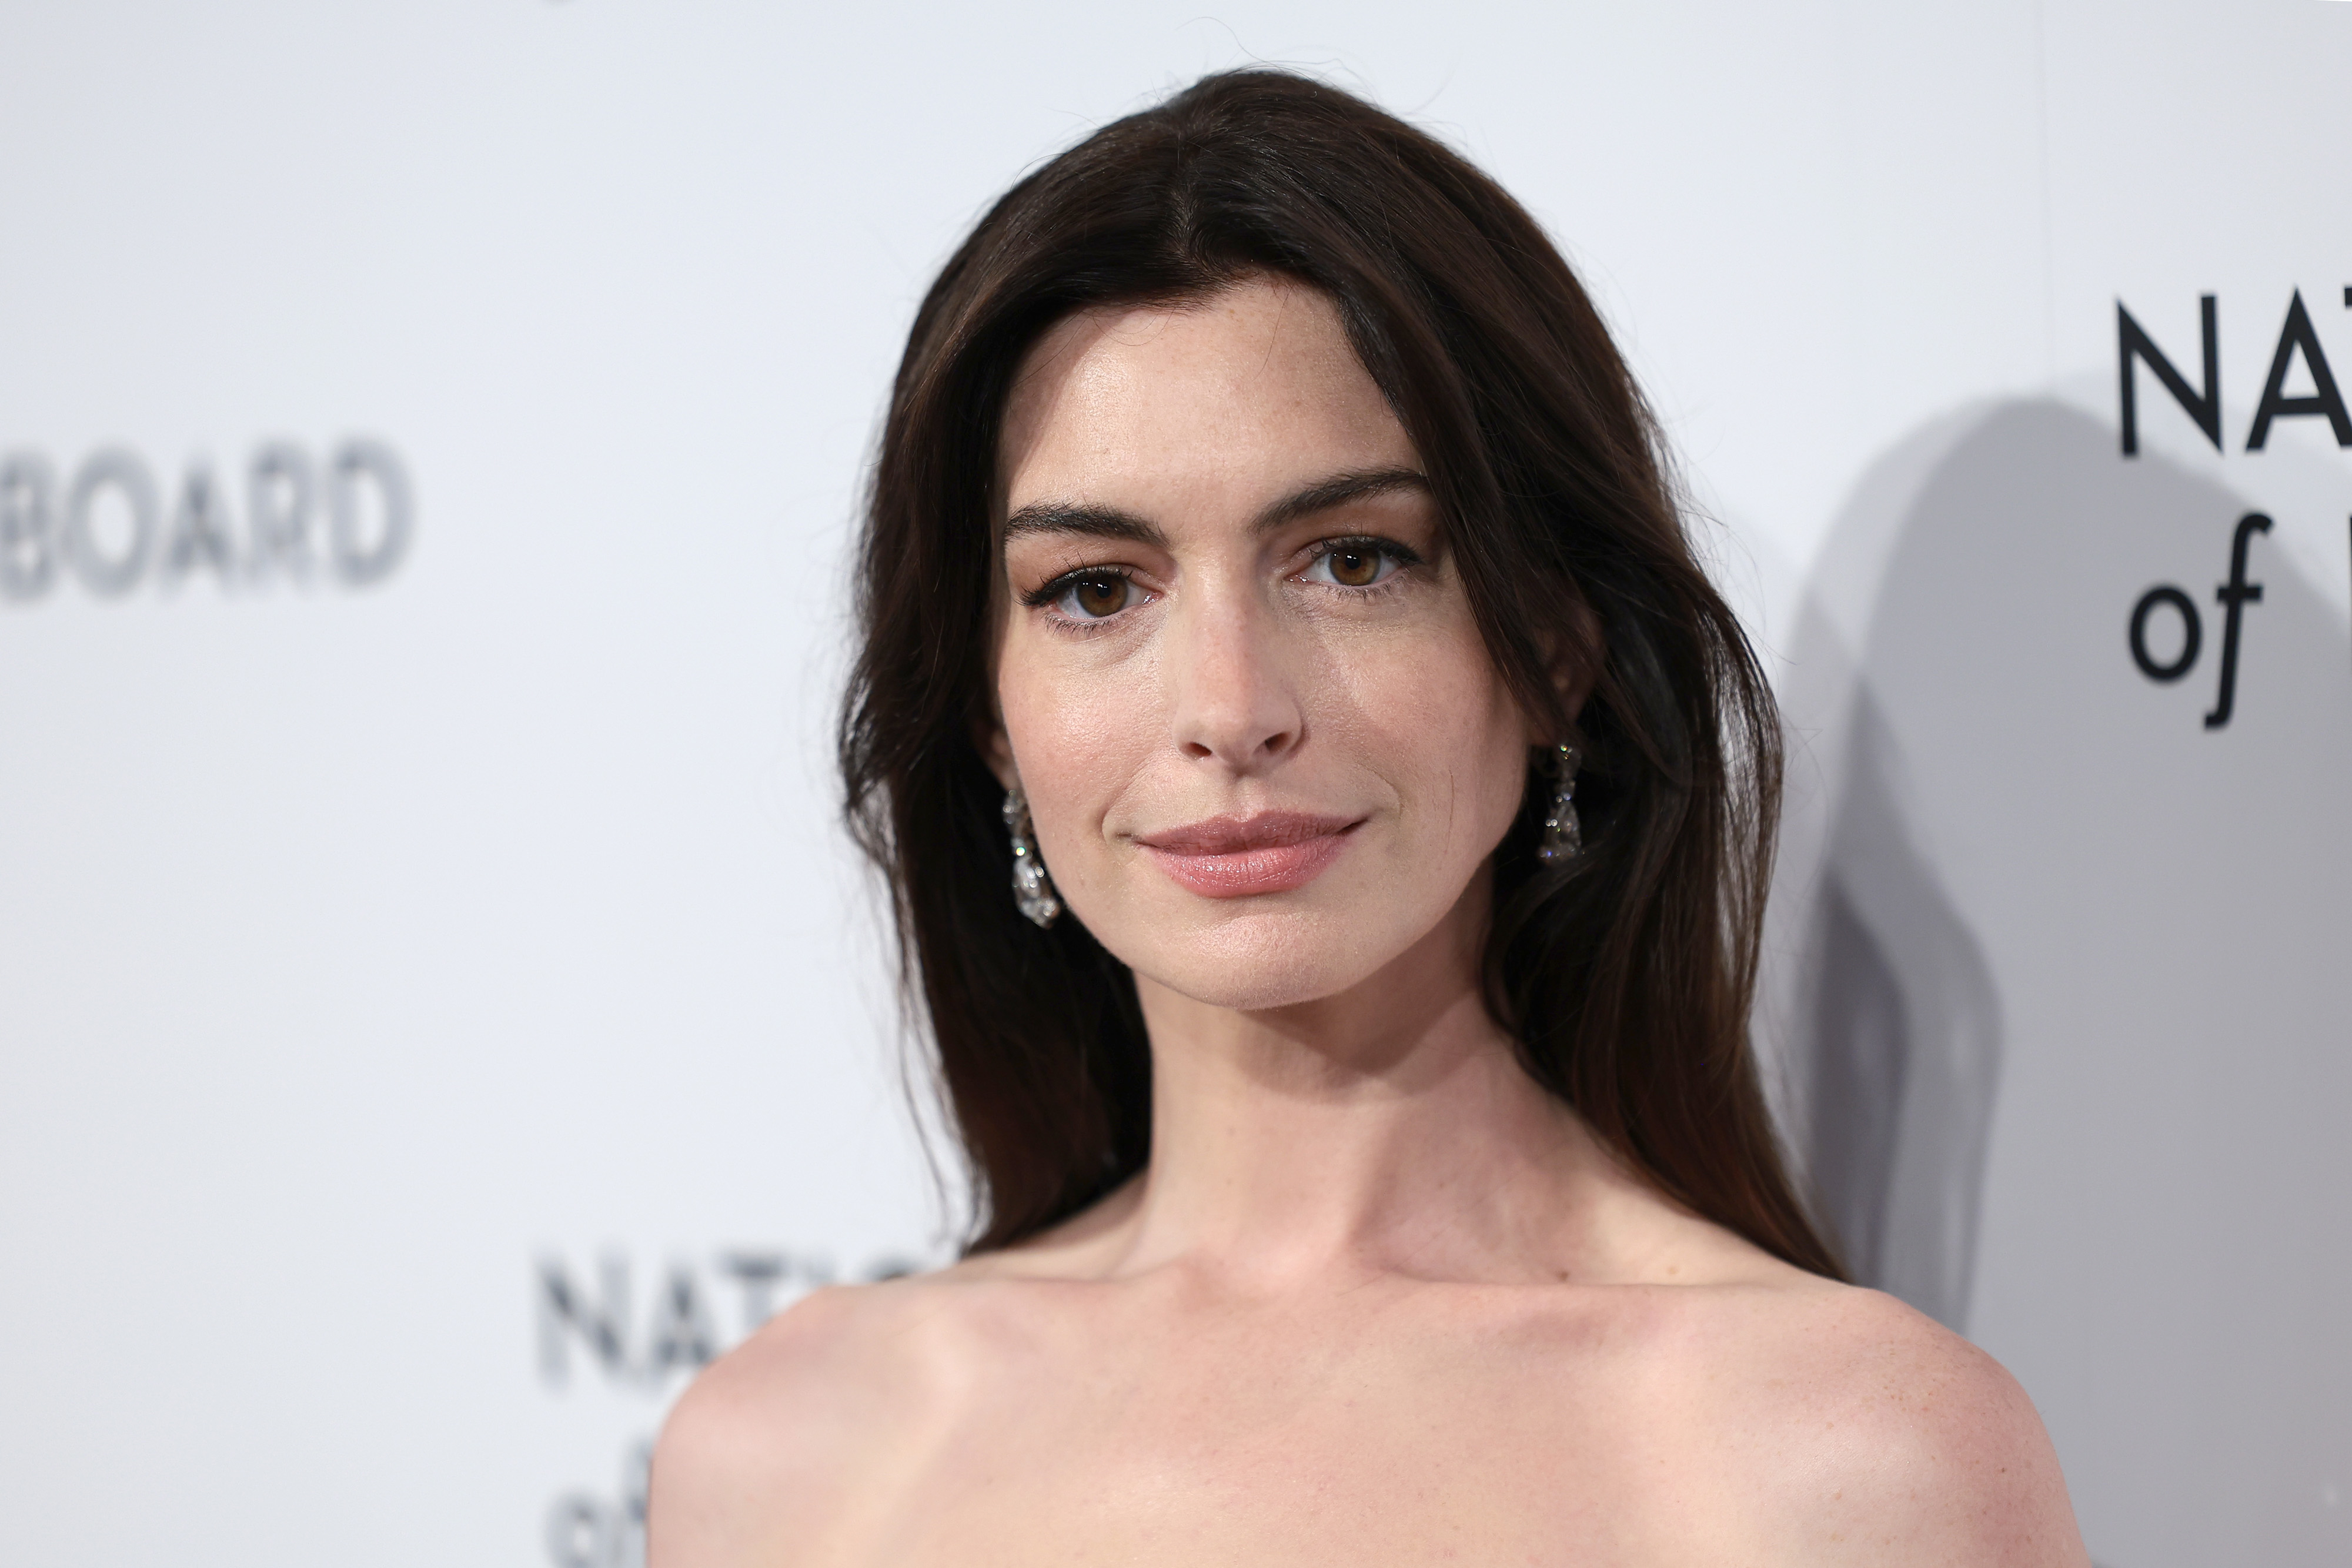 Anne Hathaway wearing a strapless gown and drop earrings at a formal event